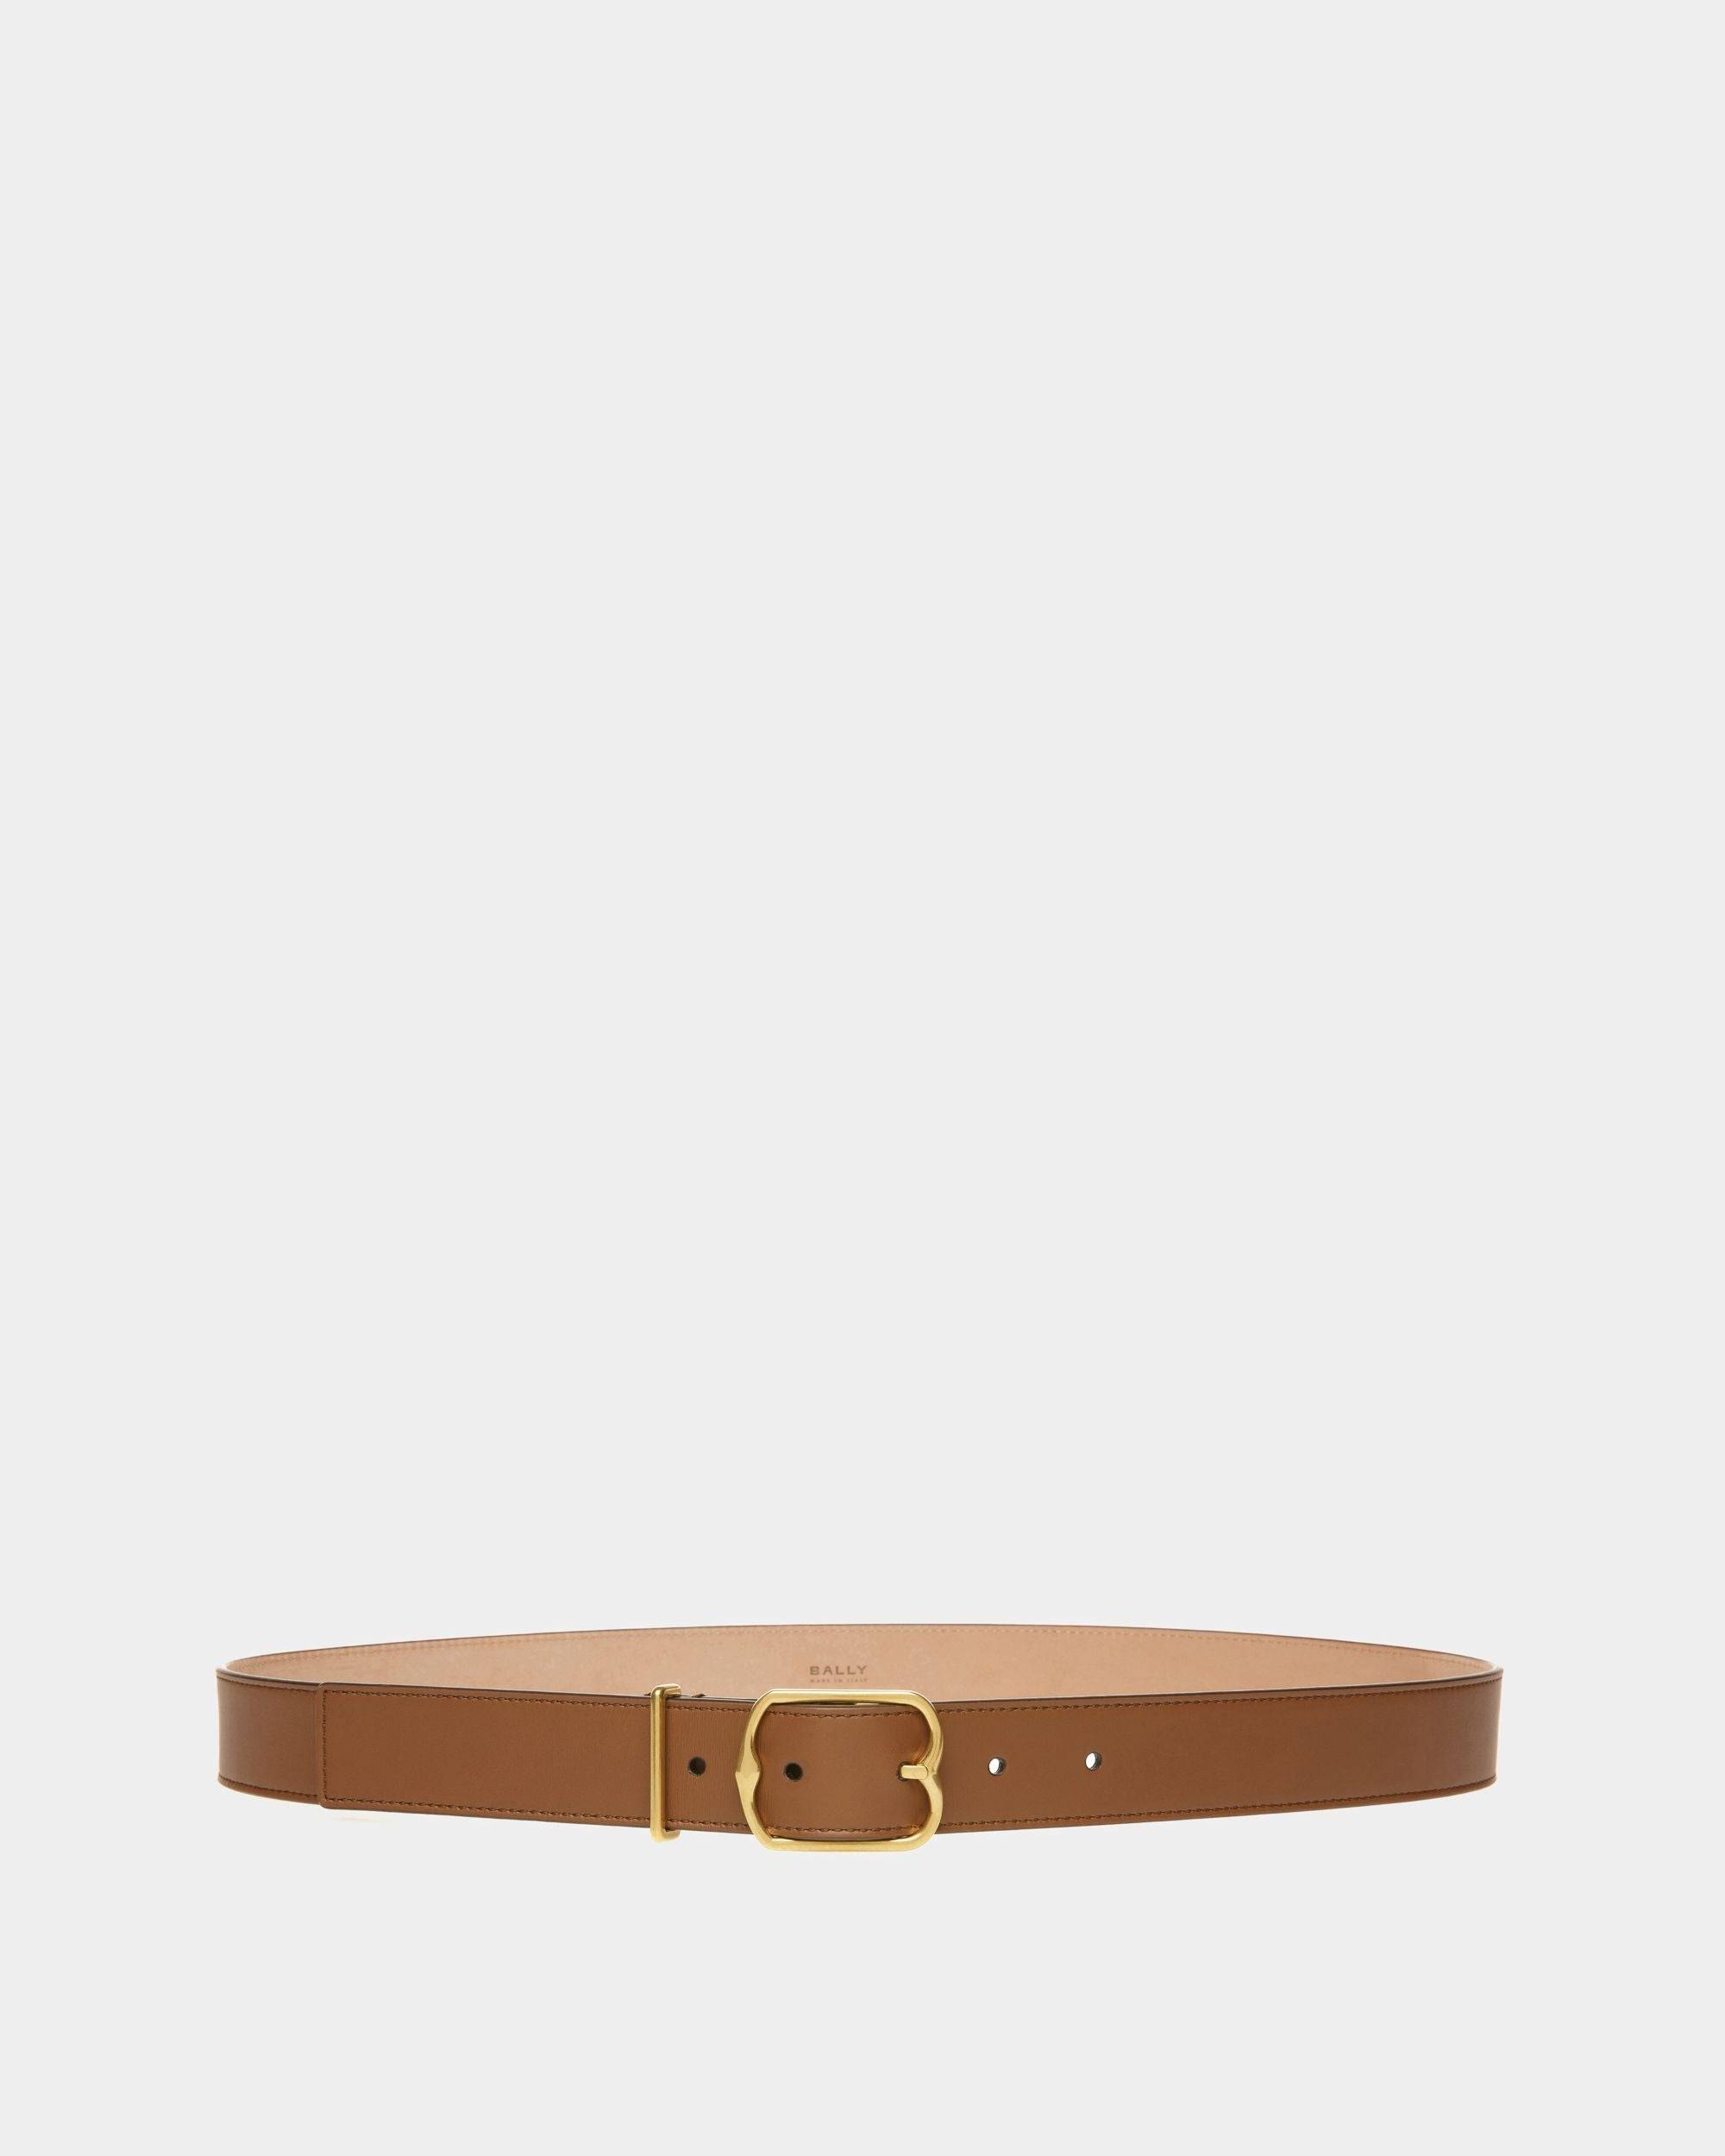 Women's Emblem 30mm Belt In Brown Leather | Bally | Still Life Front